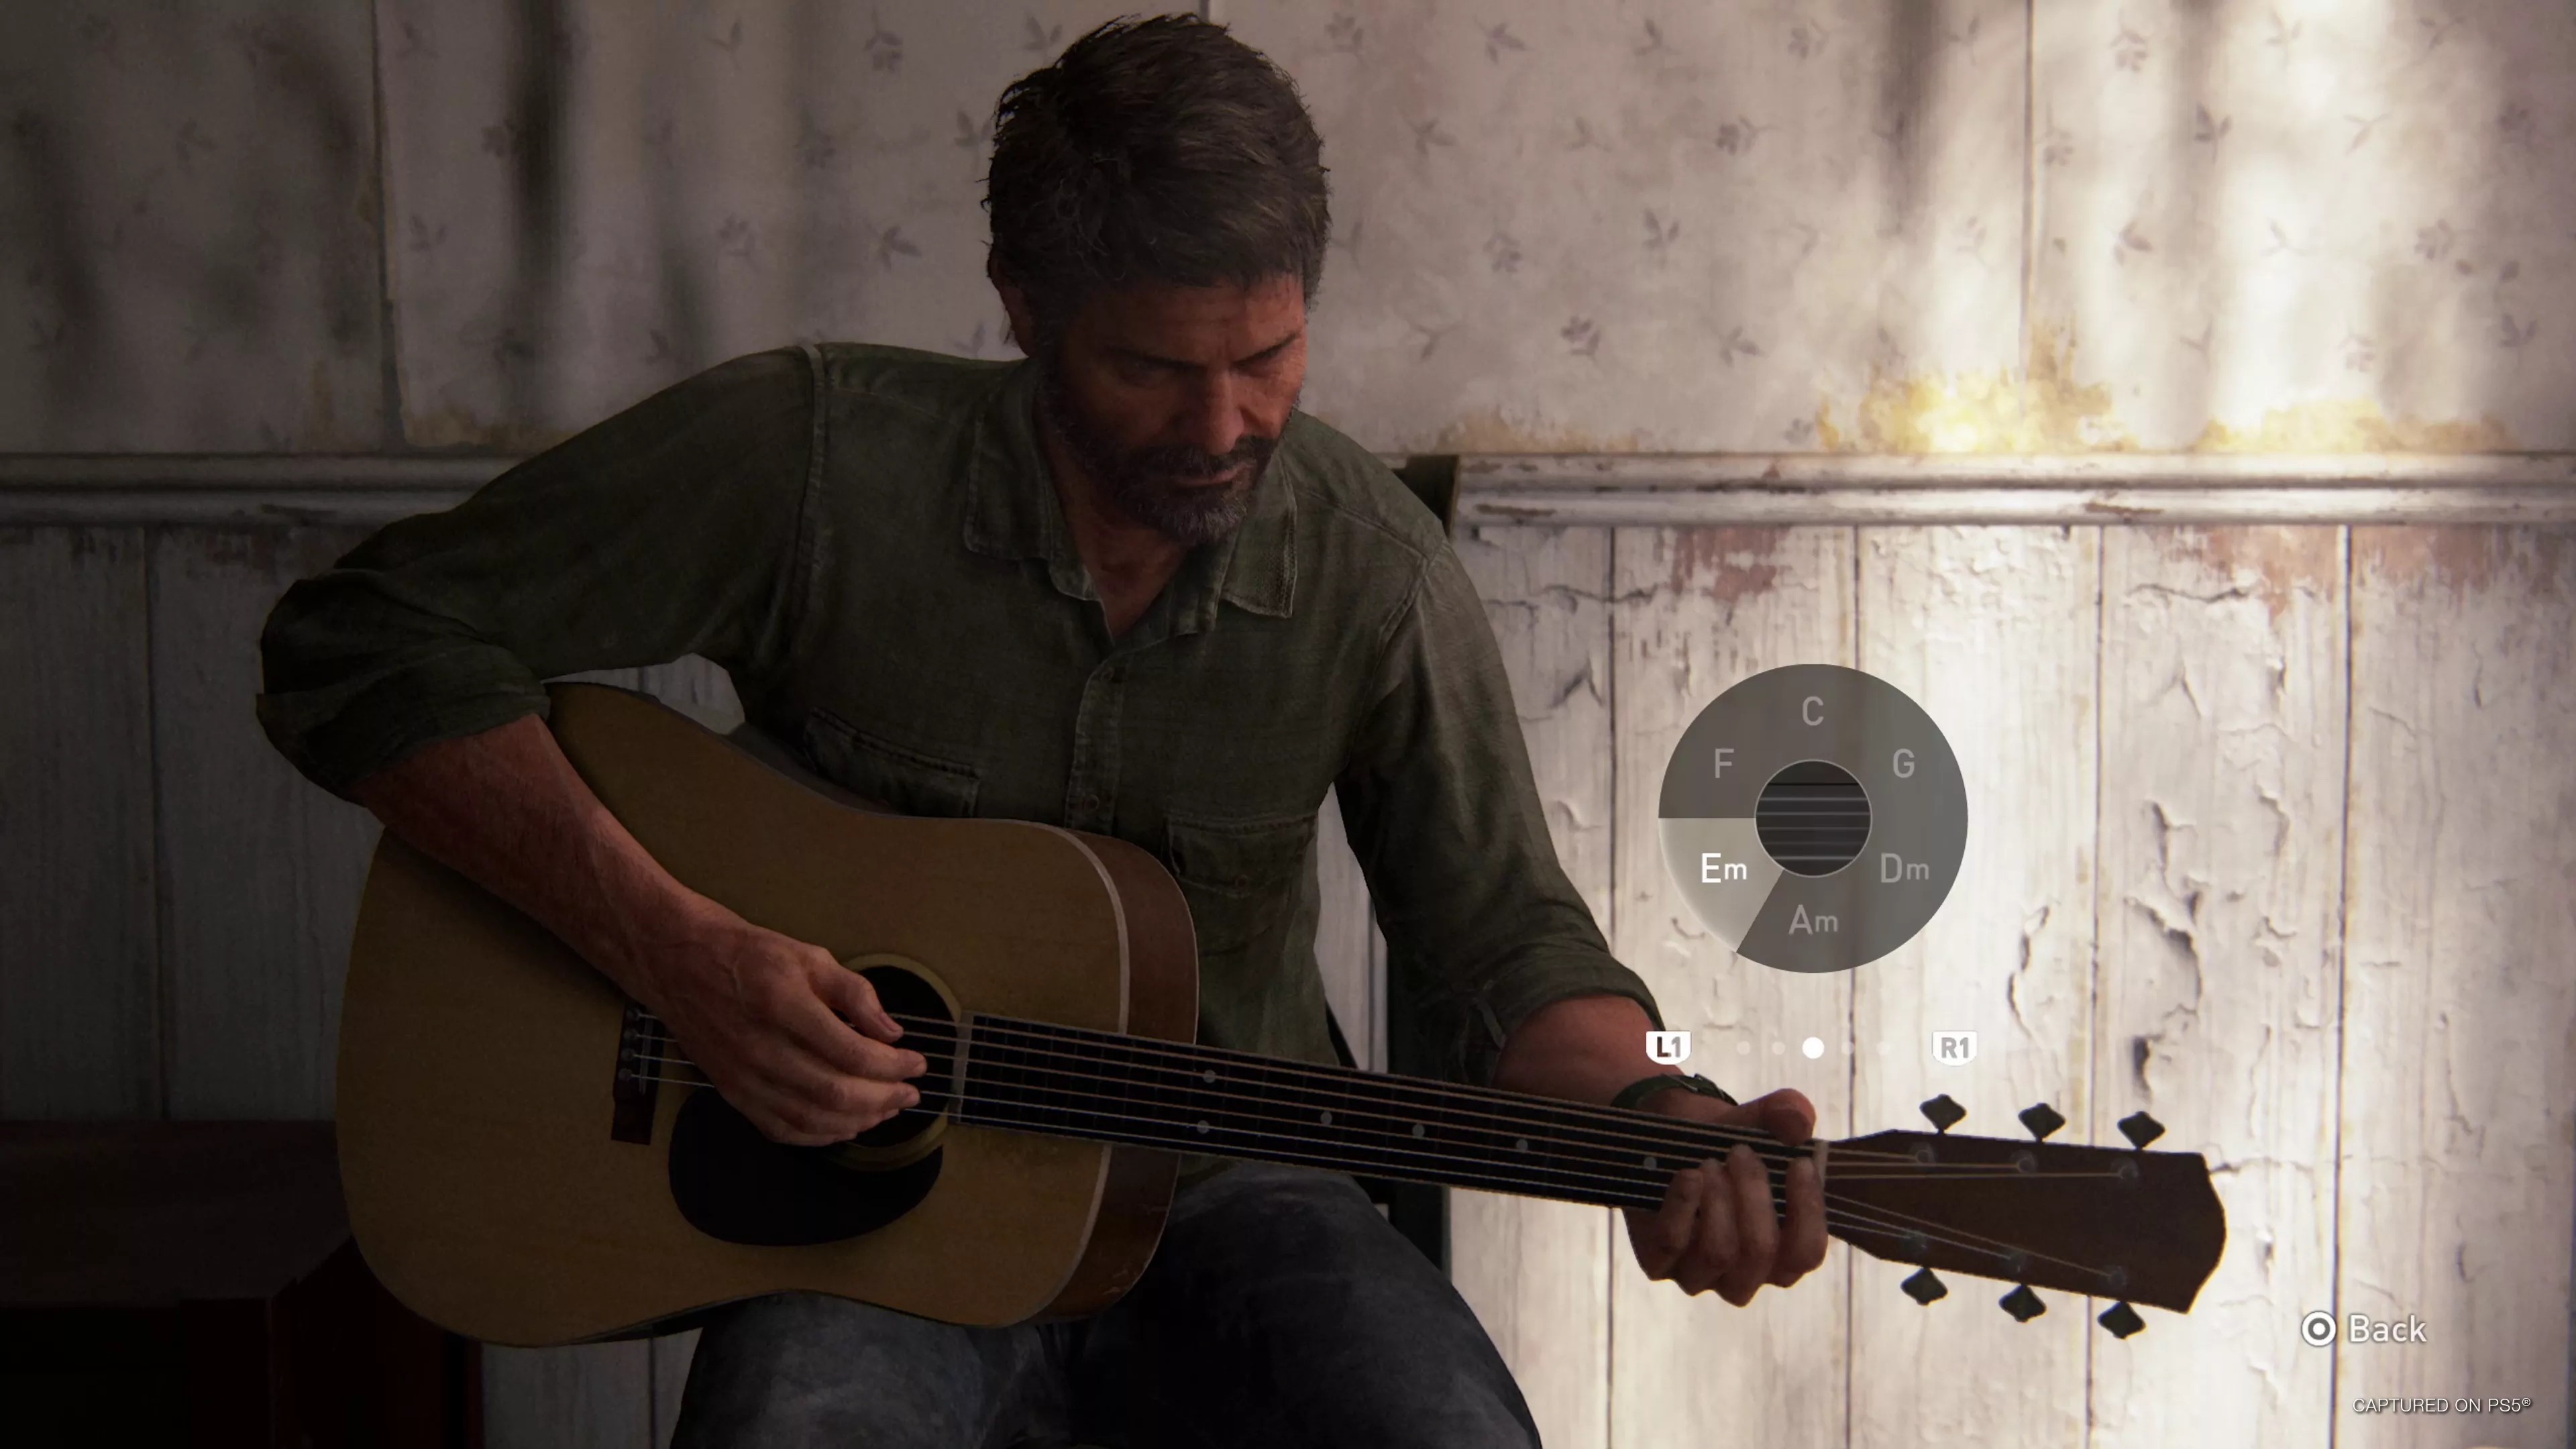 (Whether with Joel, Ellie or other characters: If the mood is right, we can pick up the guitar much more easily now)